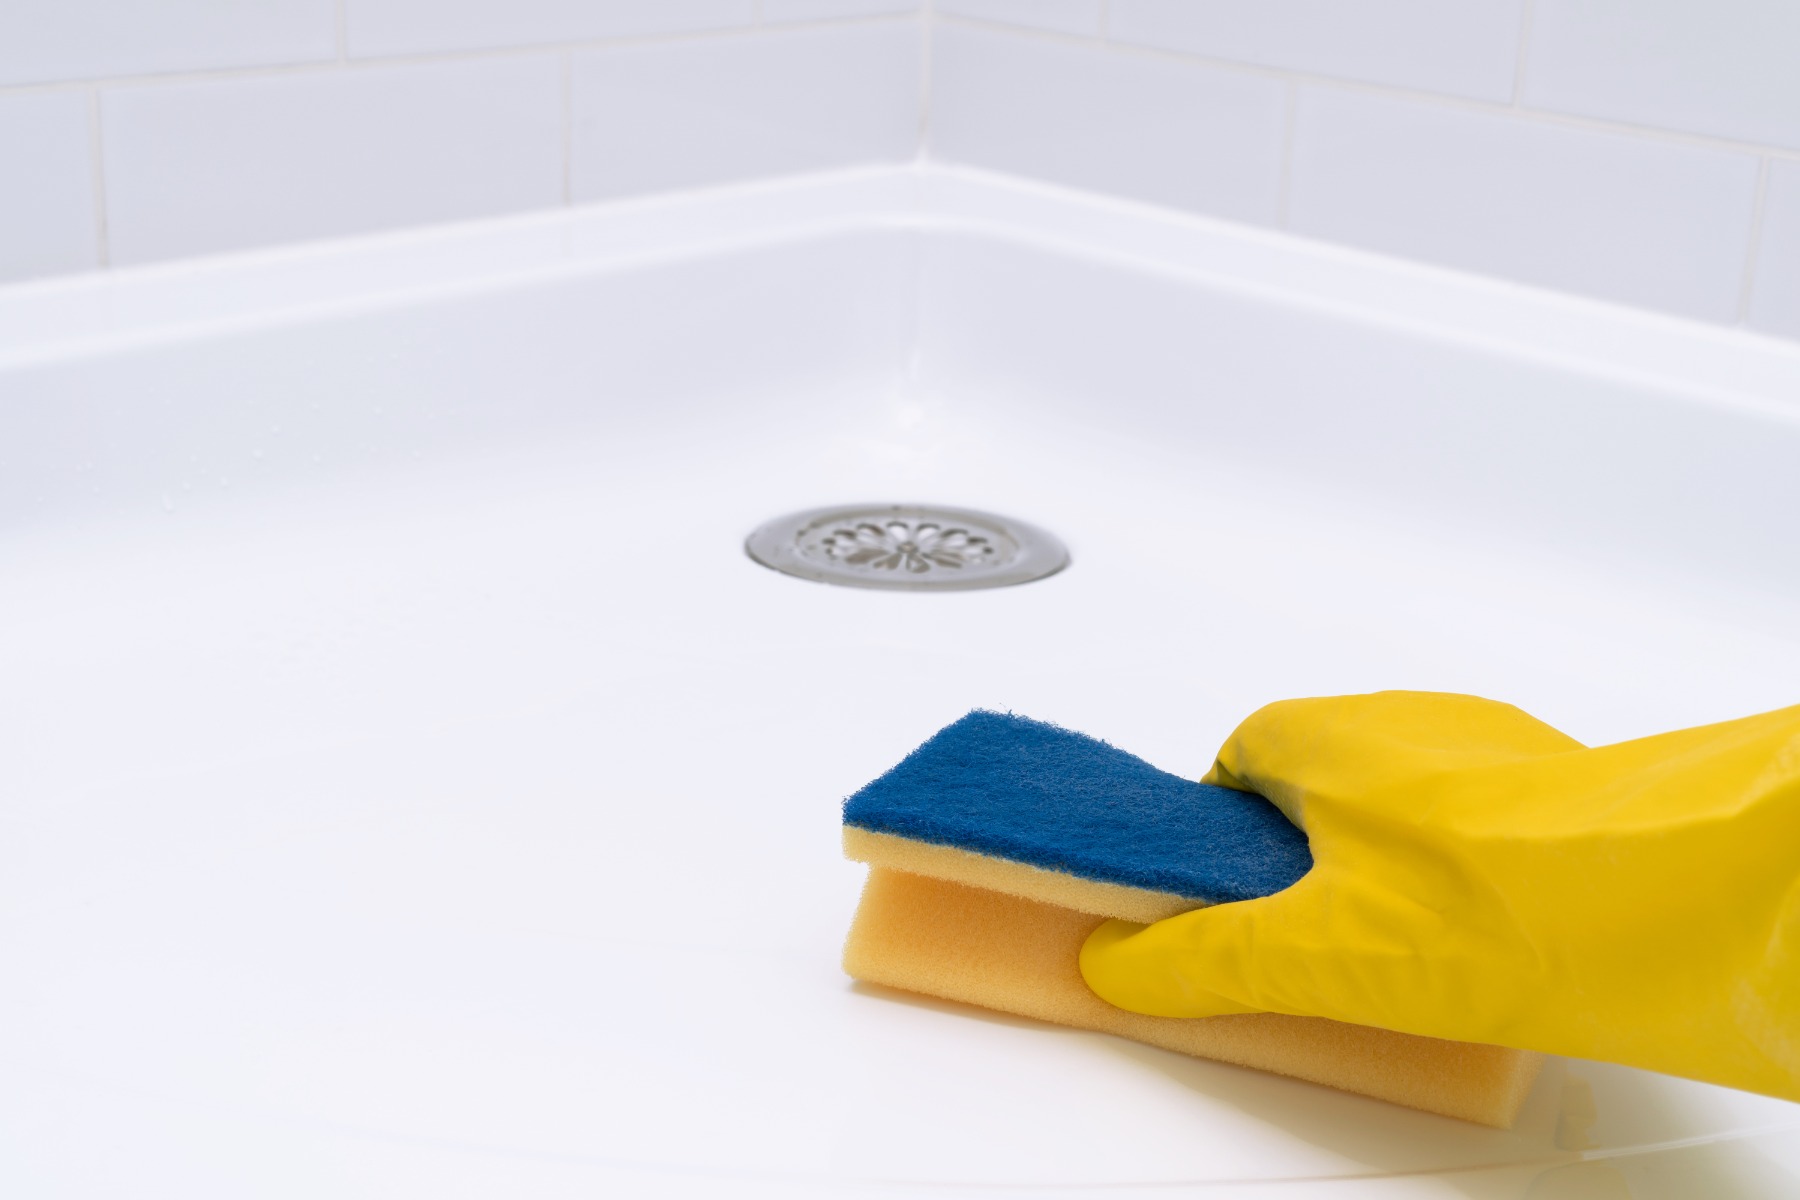 Shower Tray Getting Cleaned By Homeowner In Yellow Gloves